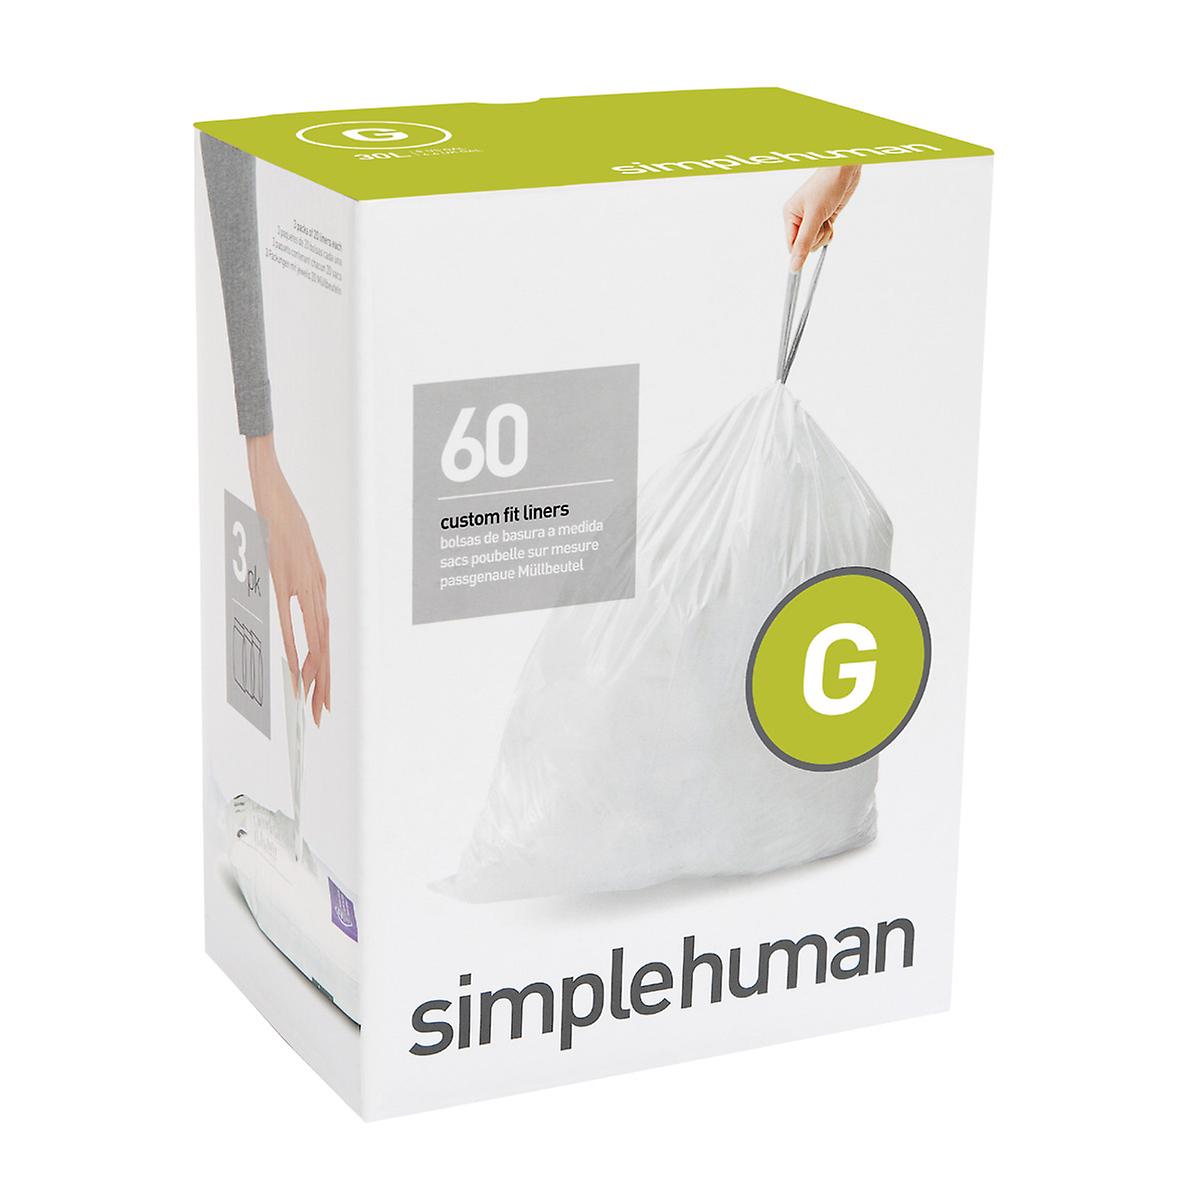 Simple Human Bags Cheapest Offers, Save 51% | jlcatj.gob.mx